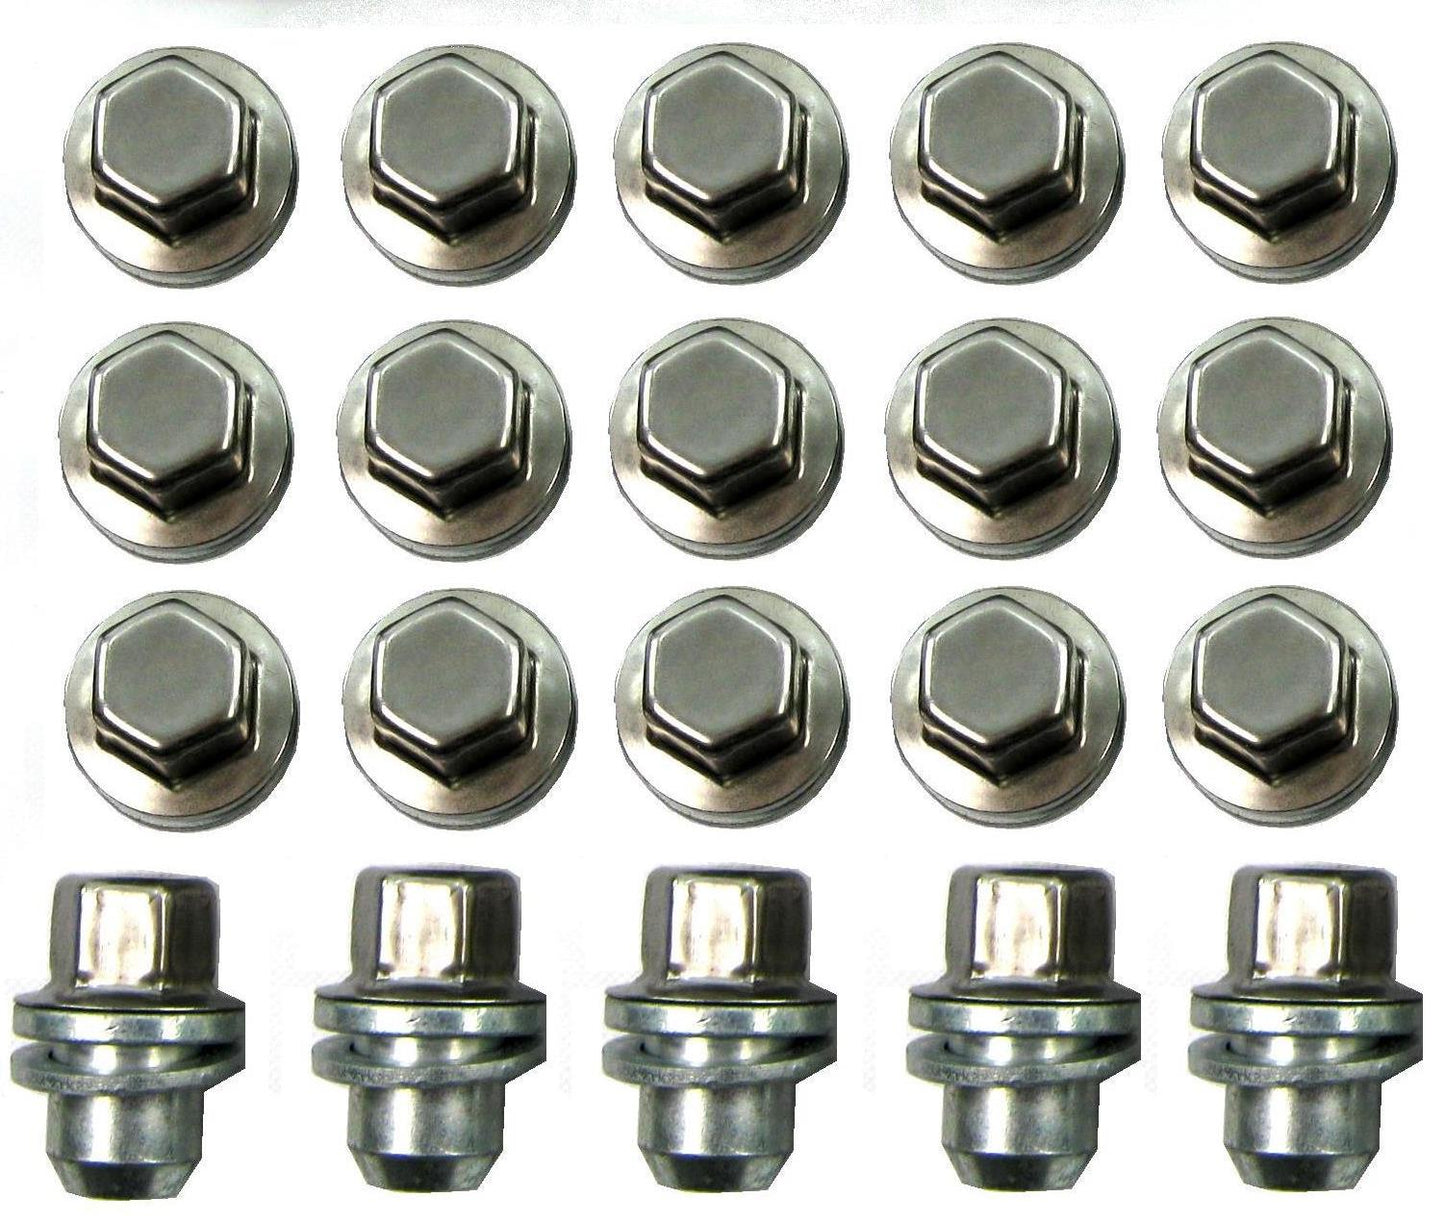 20pc Wheel nut kit for Land Rover Discovery 3 / 4